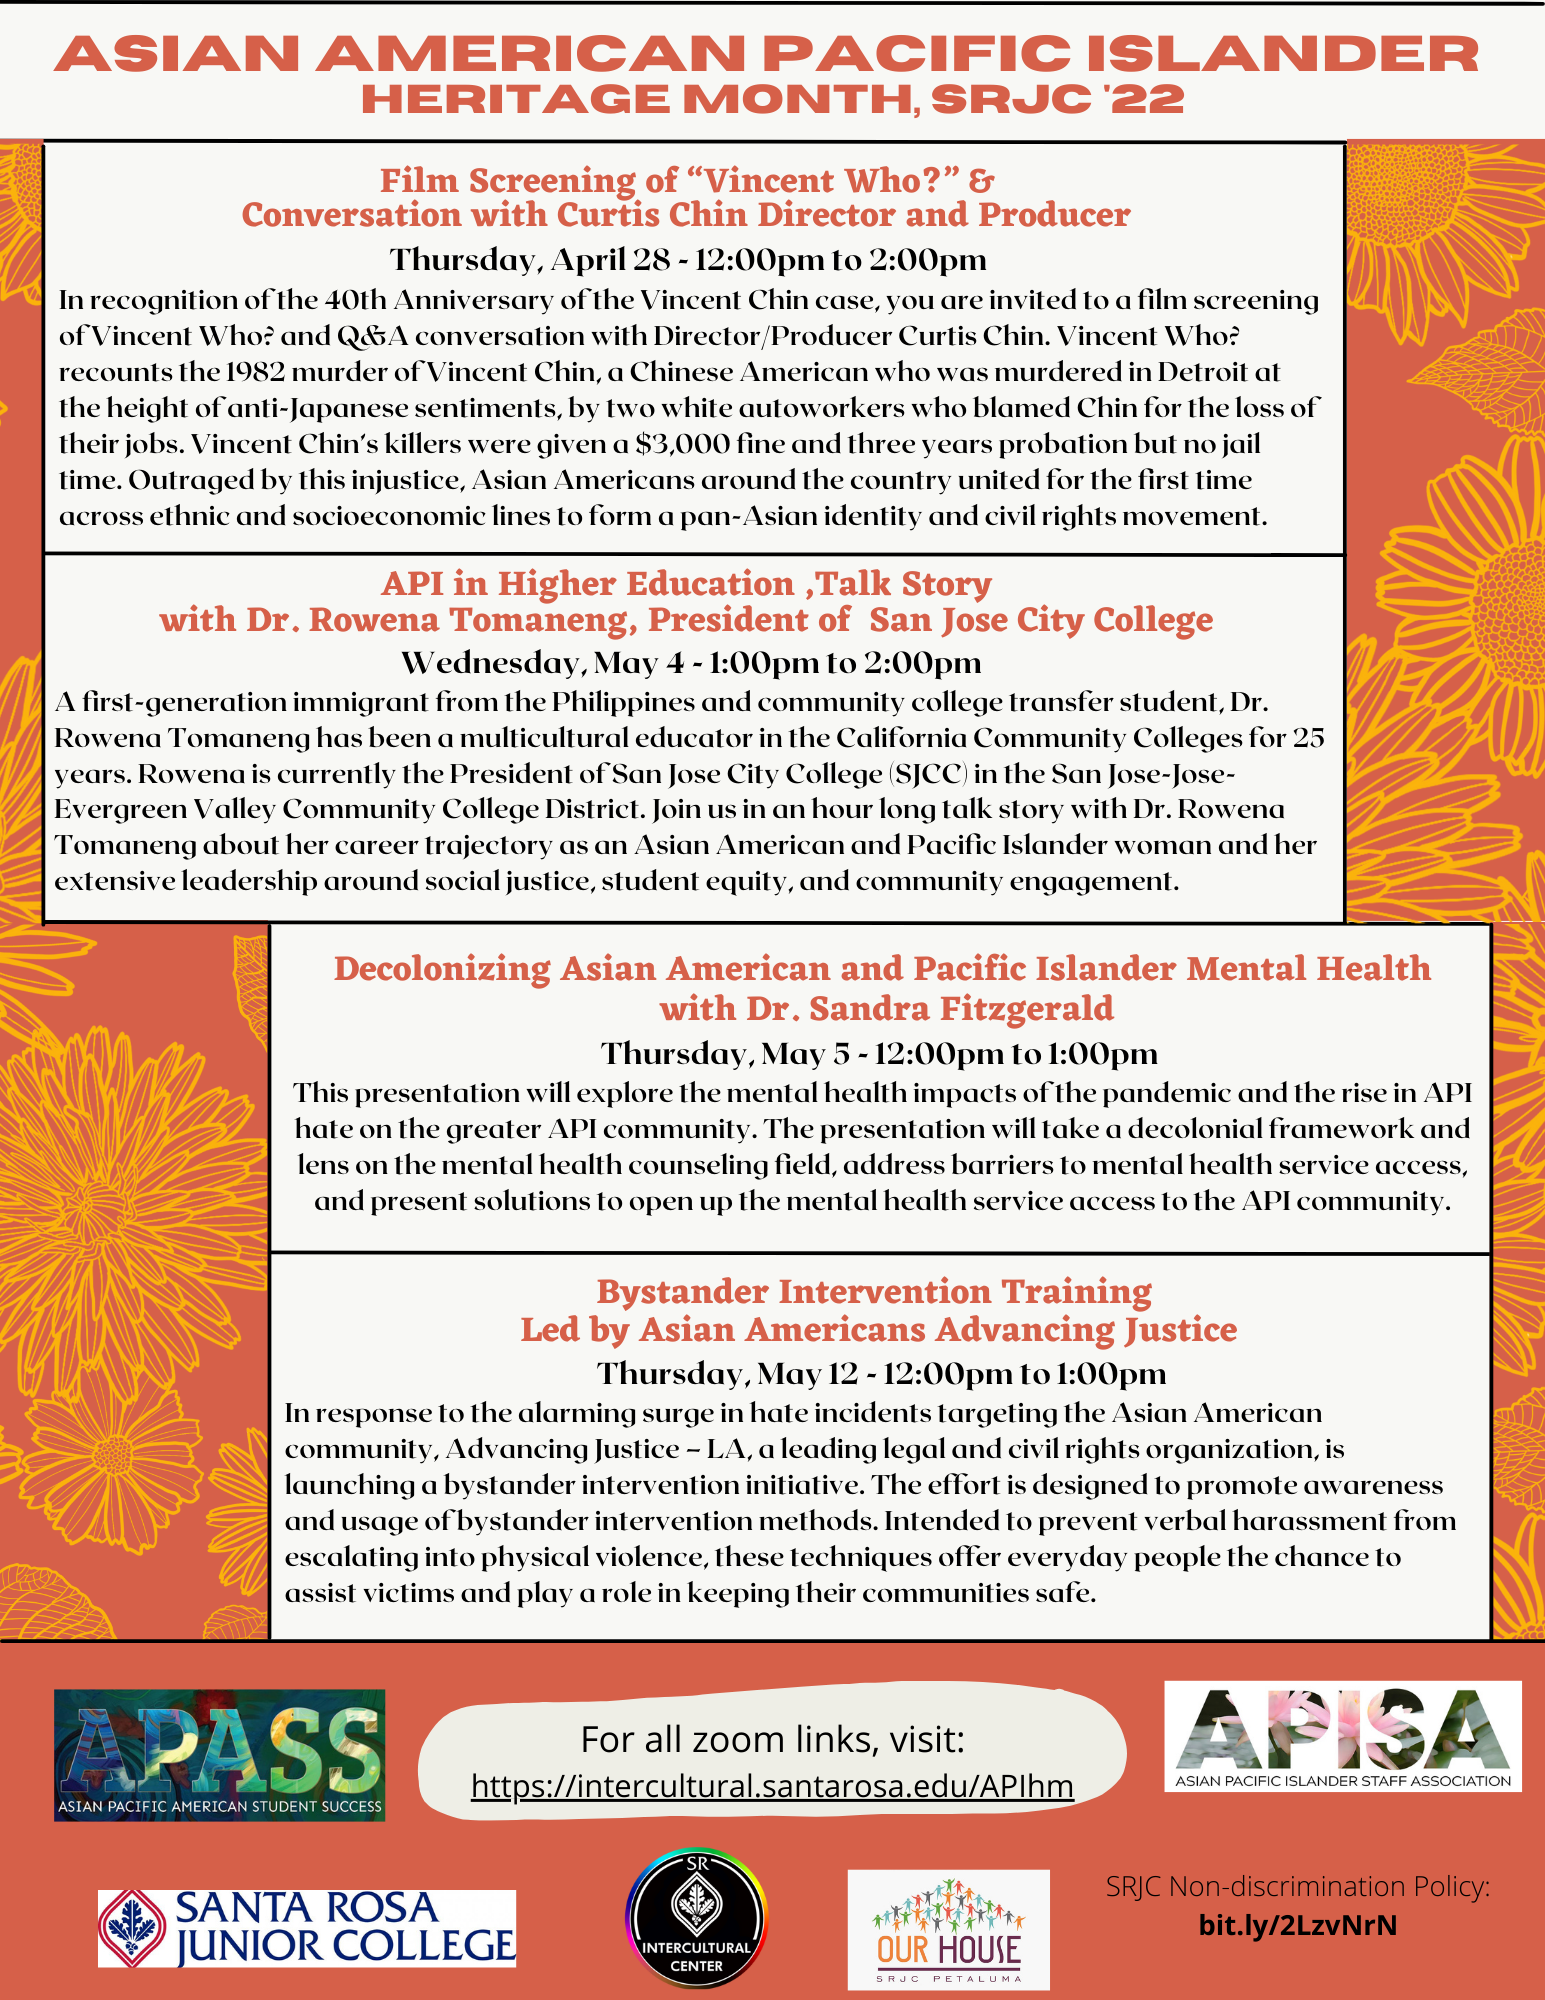 Flyer with a orange background and yellow flower outline overlay. Flyer reads "Asian American Pacific Islander History Month". All other text is to the left of the flyer